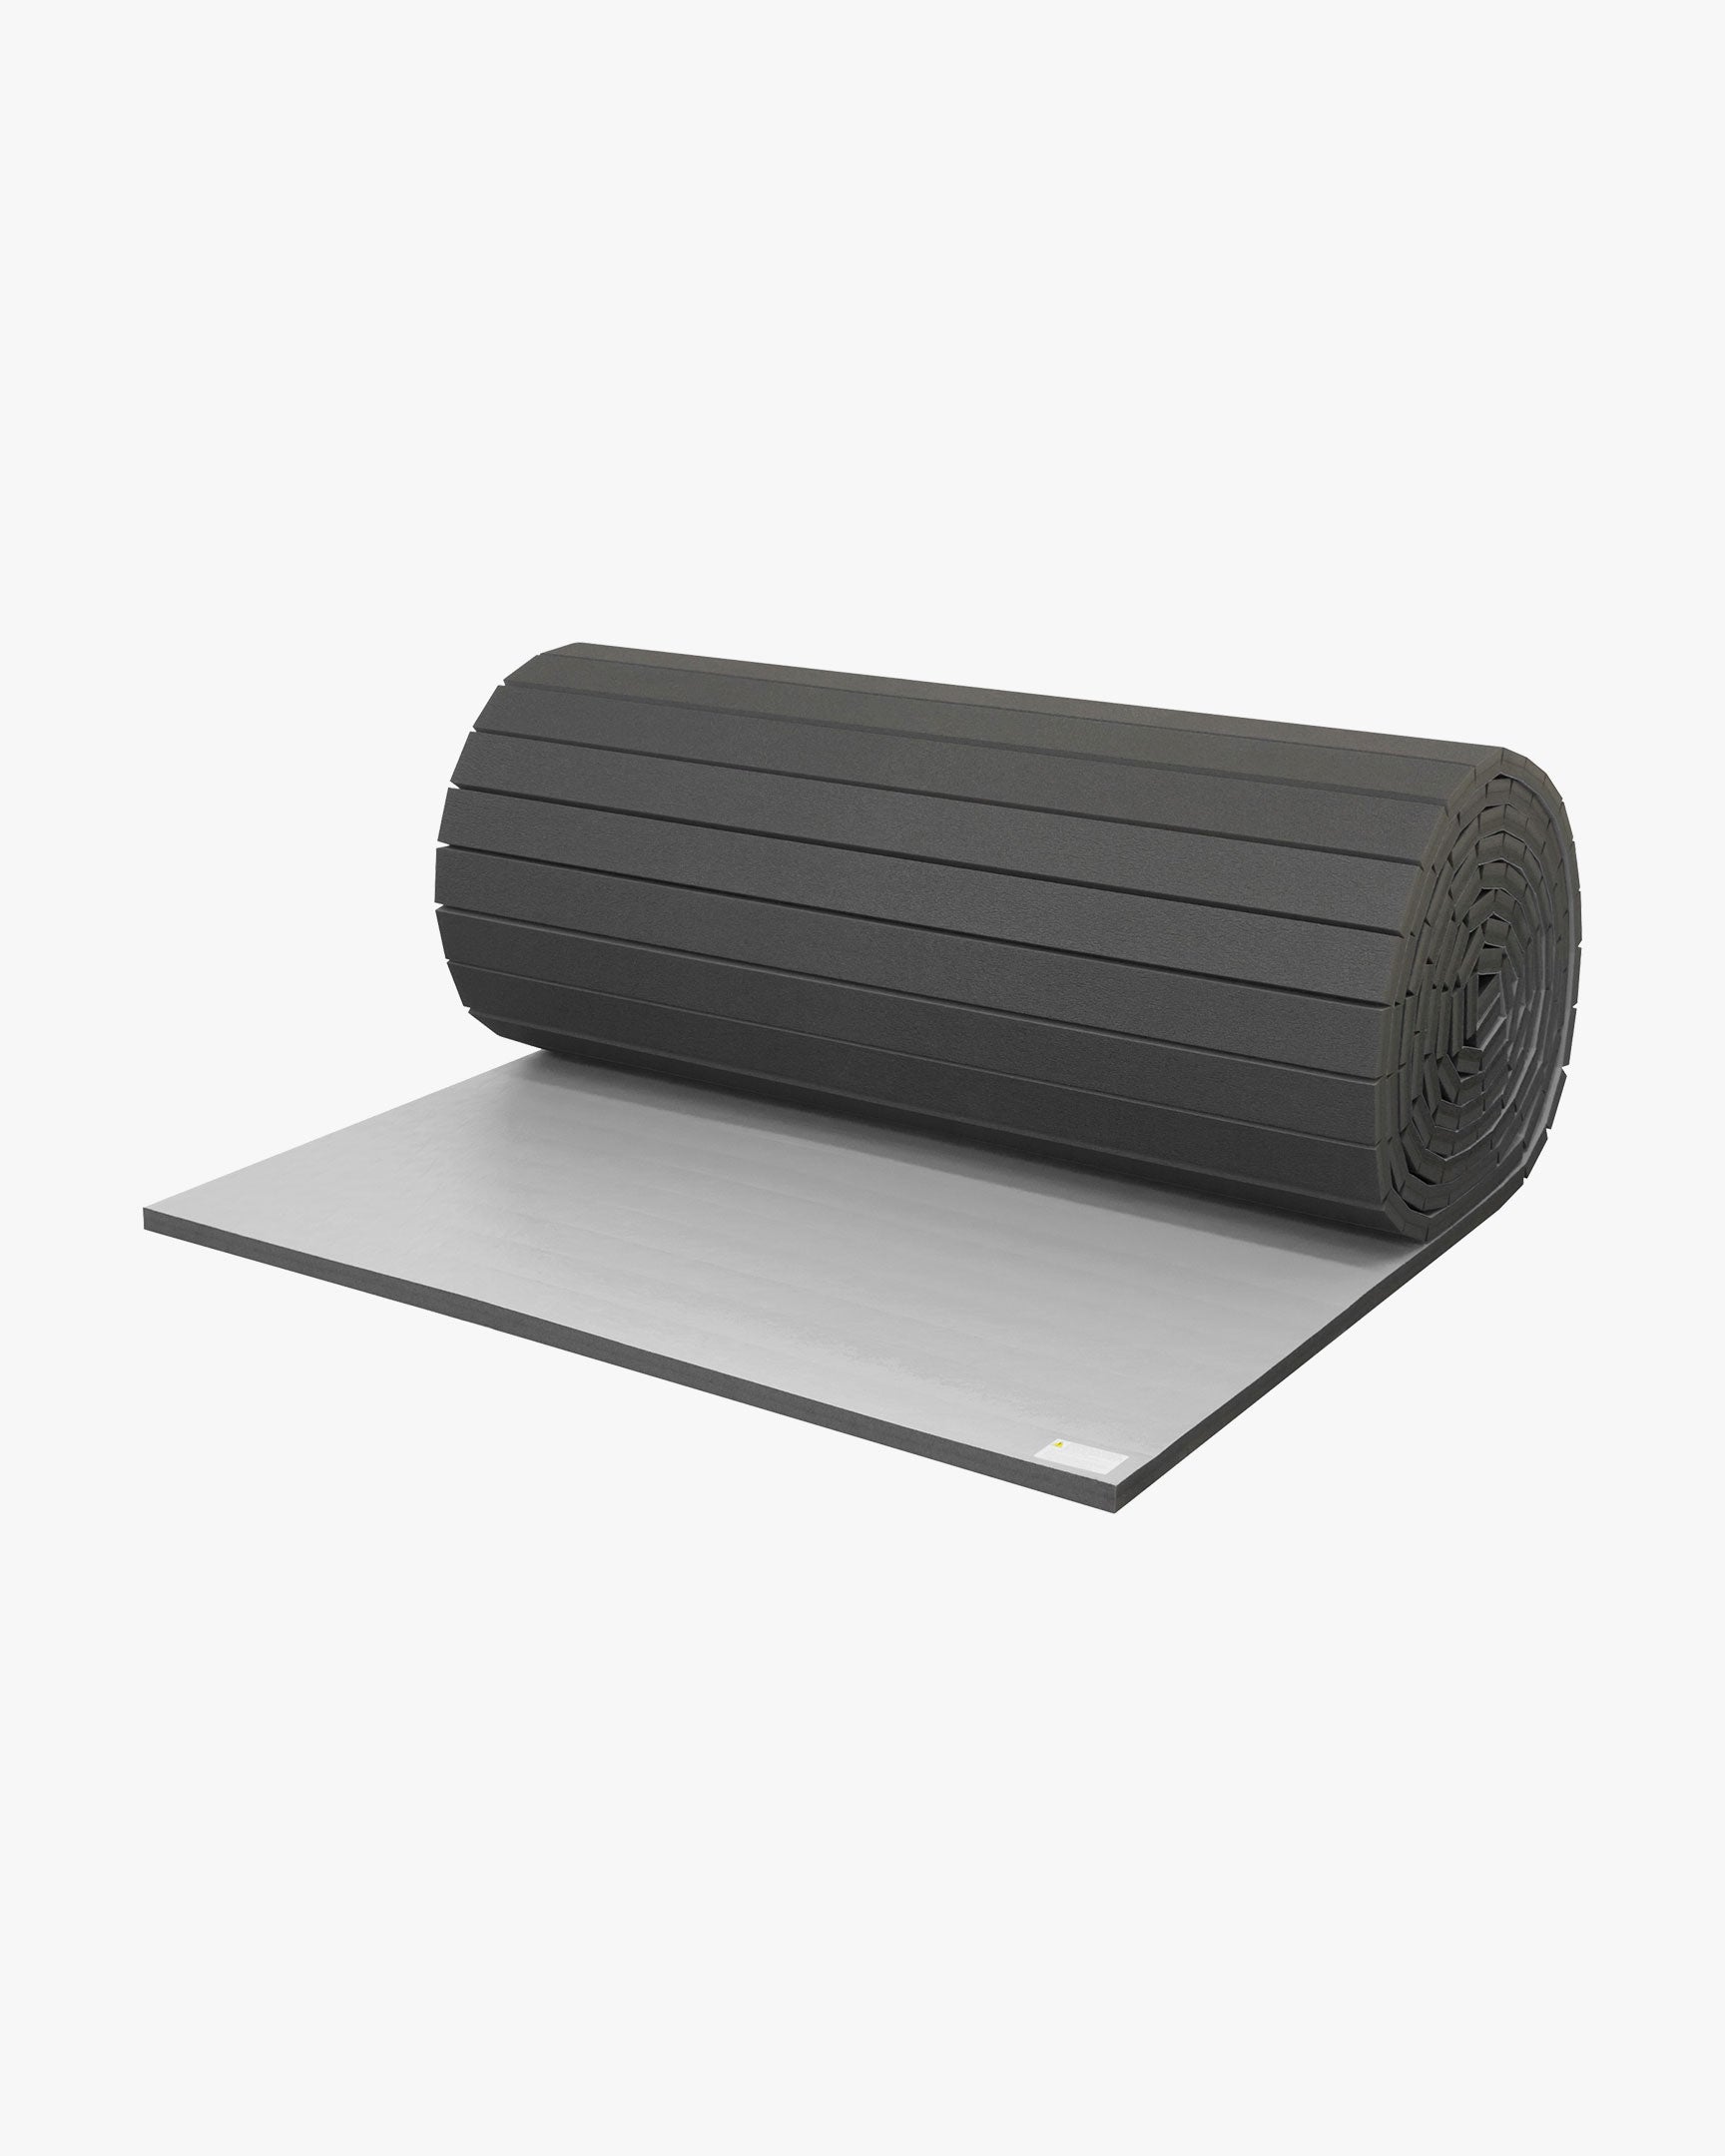 Custom Rollout Mat - .8 Inches Thick Charcoal Grey